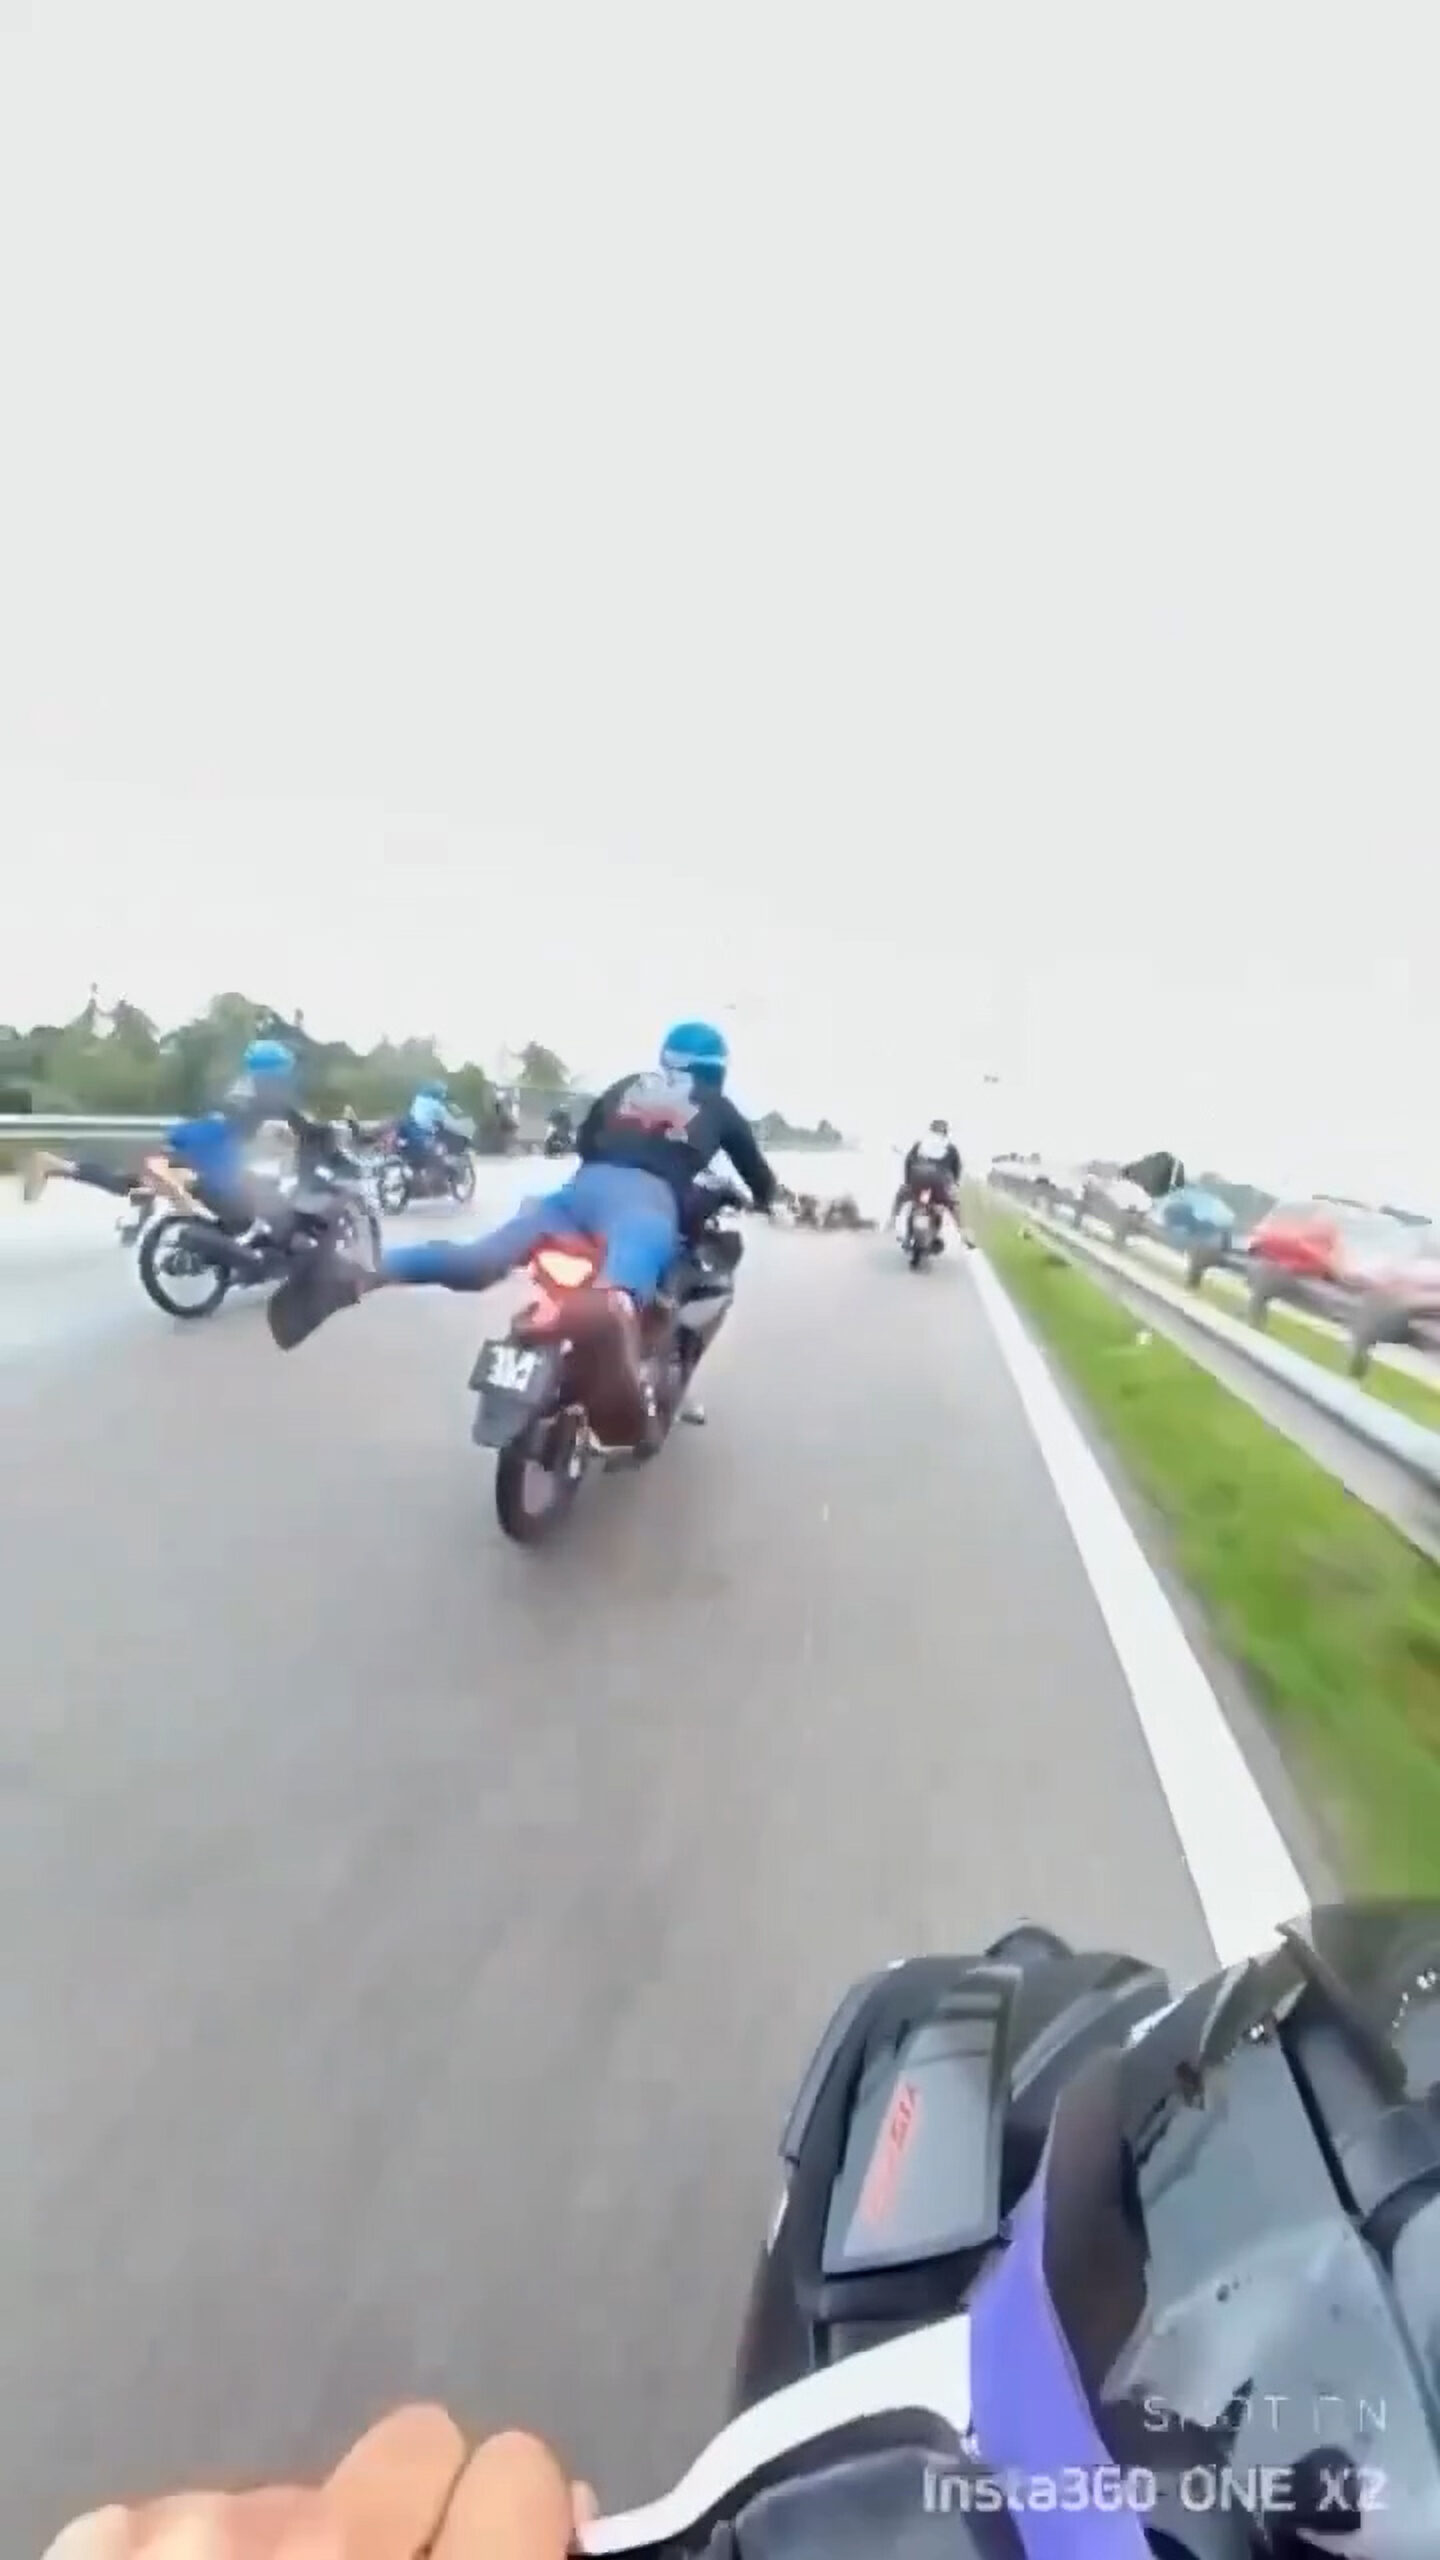 Read more about the article Cops Detain Bikers For Superman Daredevil Stunts After Crash Causes Pile-Up